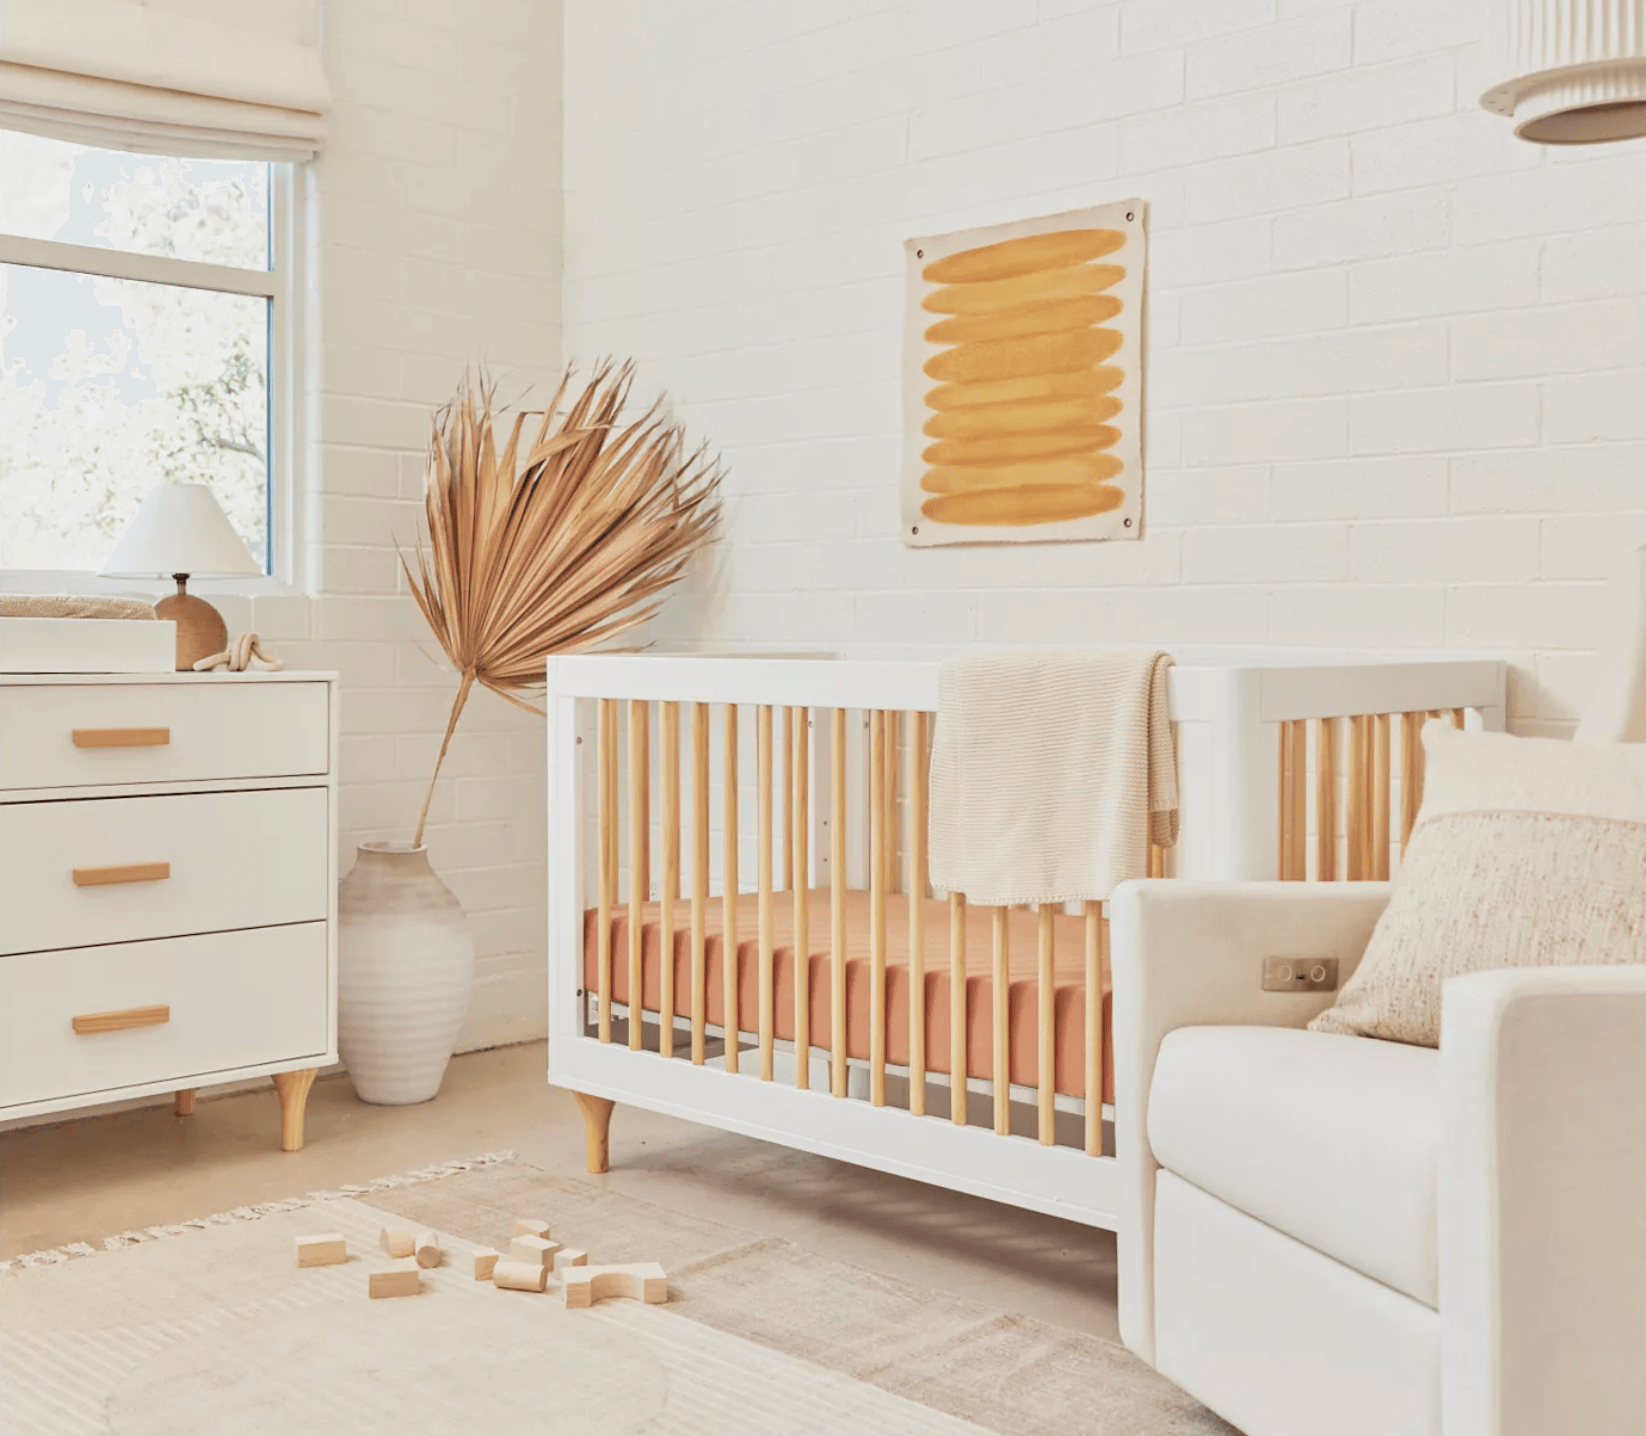 Lolly Nursery Furniture Collection - The Baby's Room